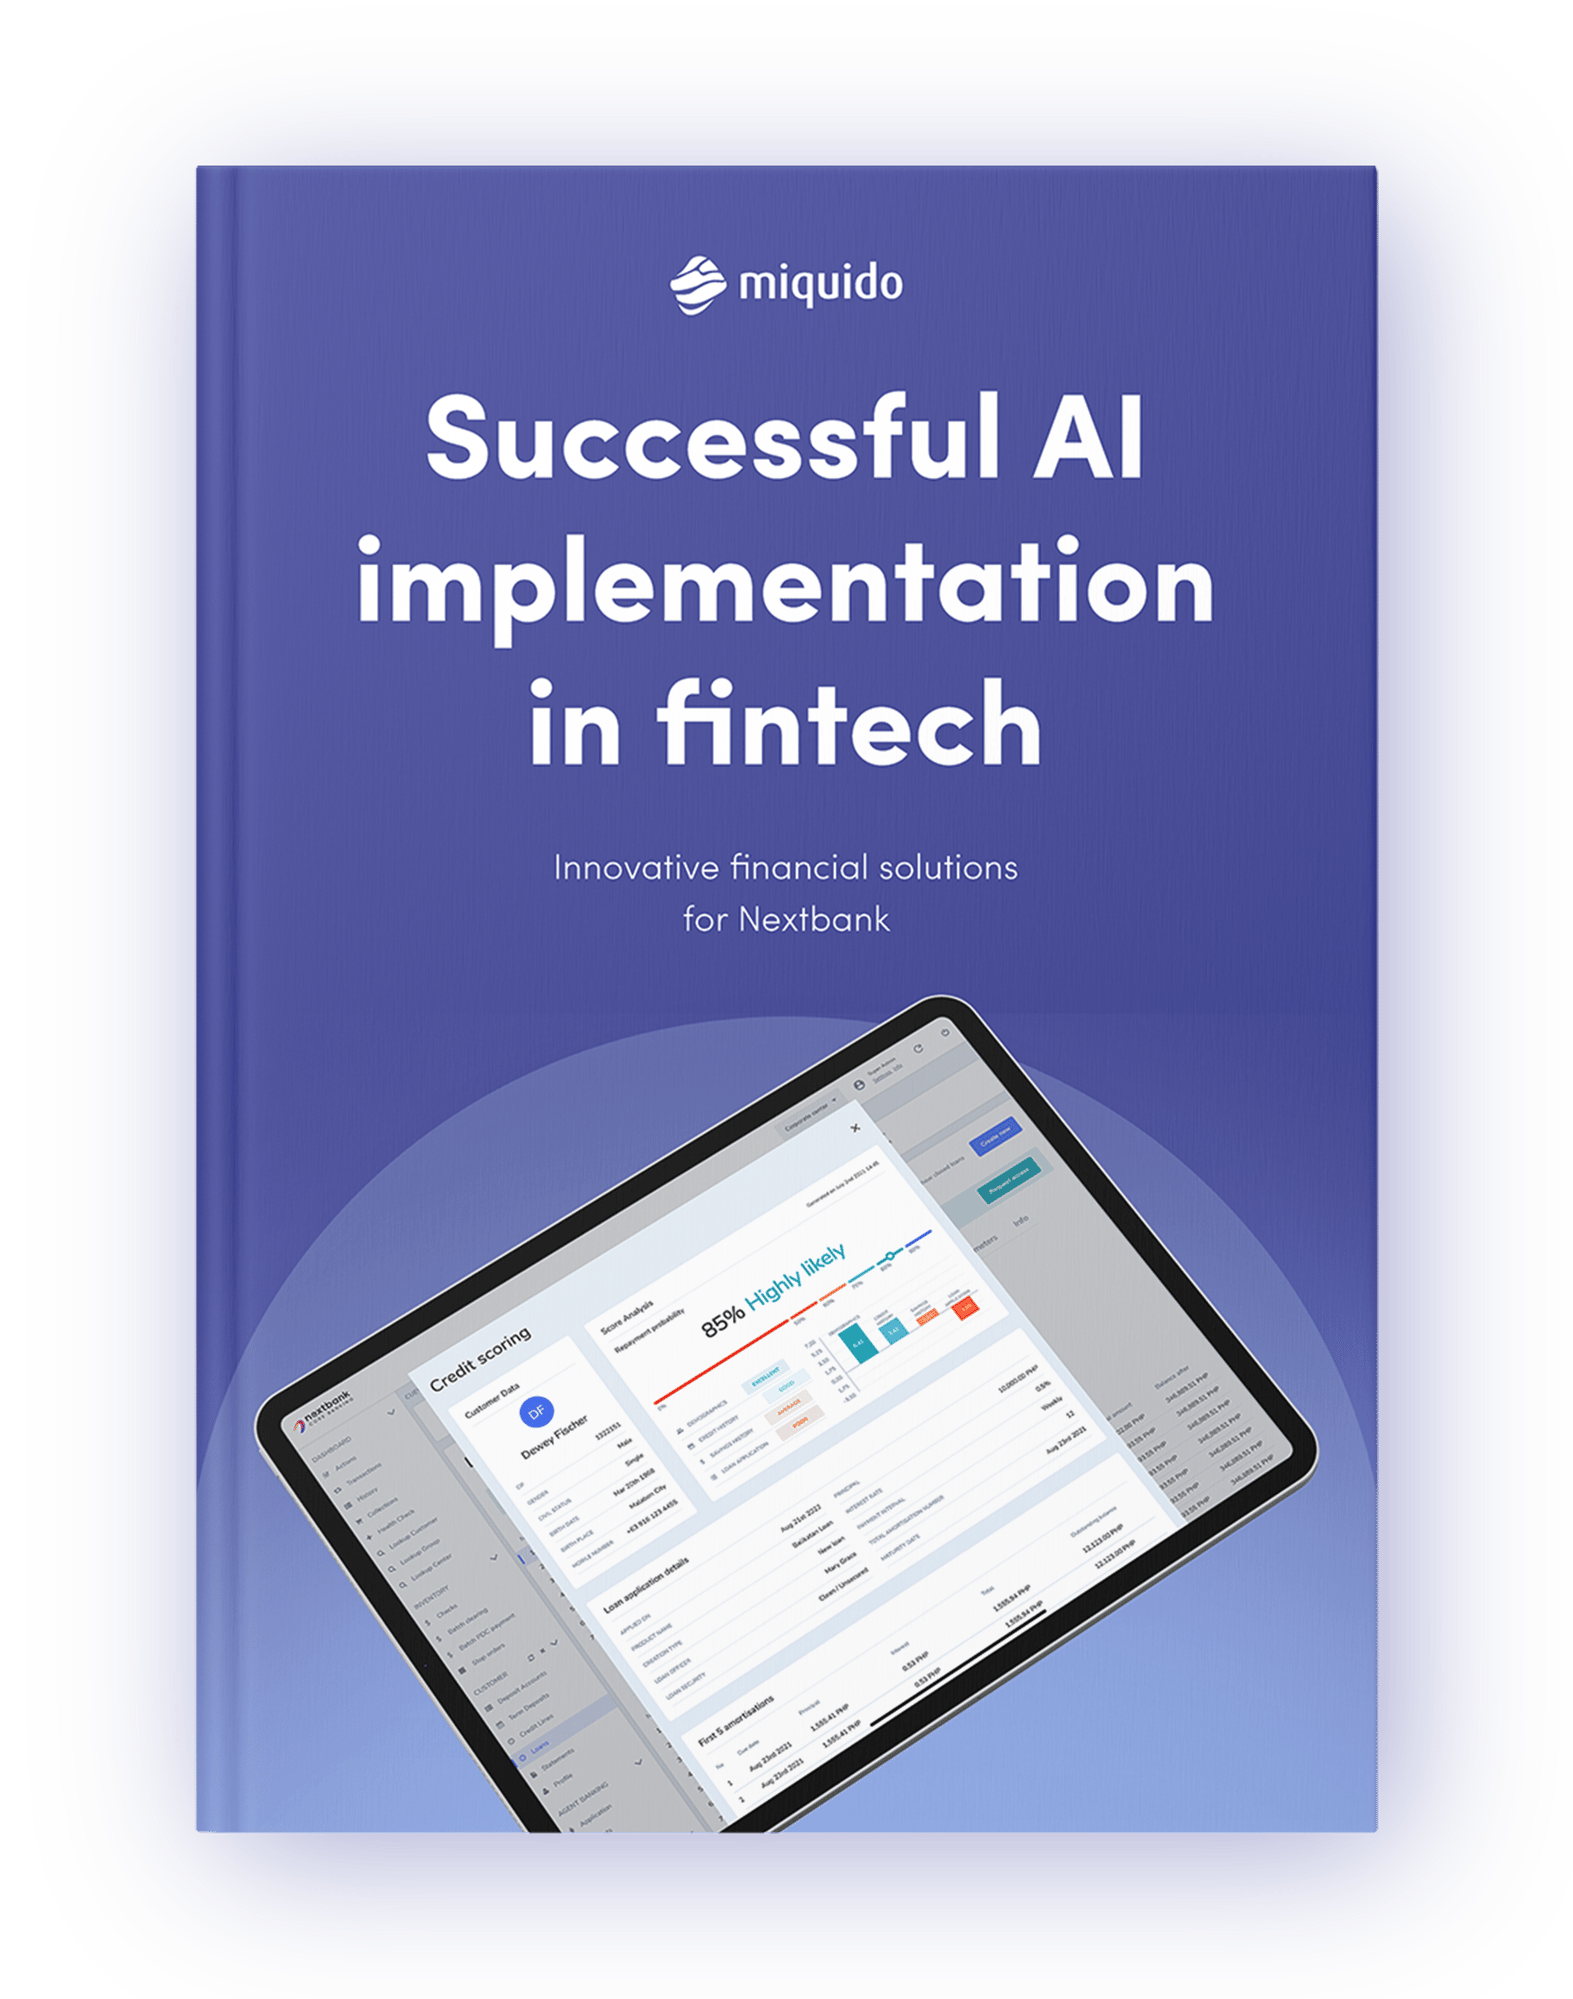 Successful AI implementation in fintech – Shadow book cover mockup